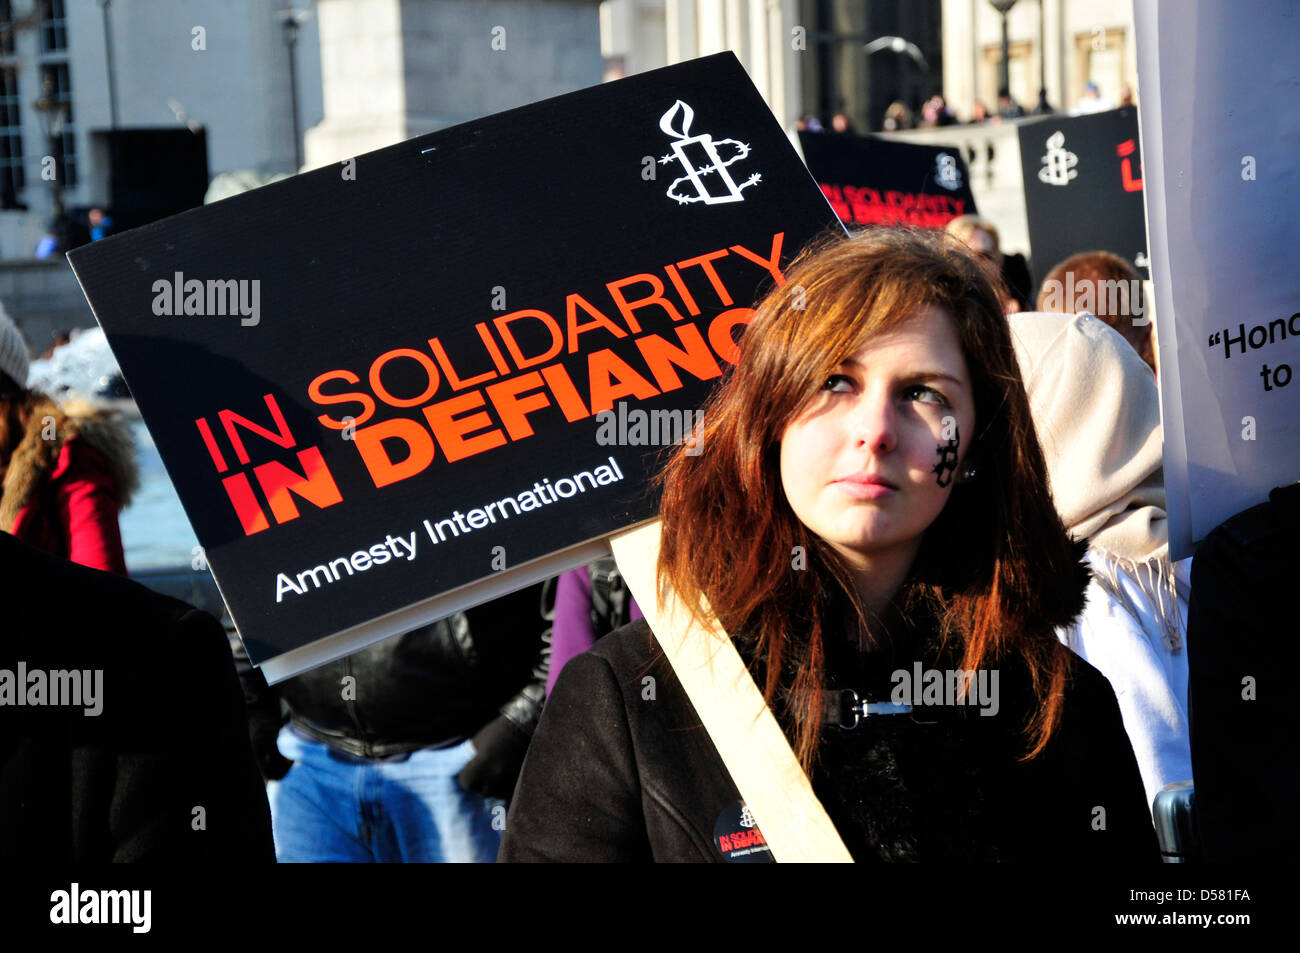 A young woman holds a banner reading ' in solidarity in defiance' at a rally in Trafalgar Square, London, UK. Stock Photo